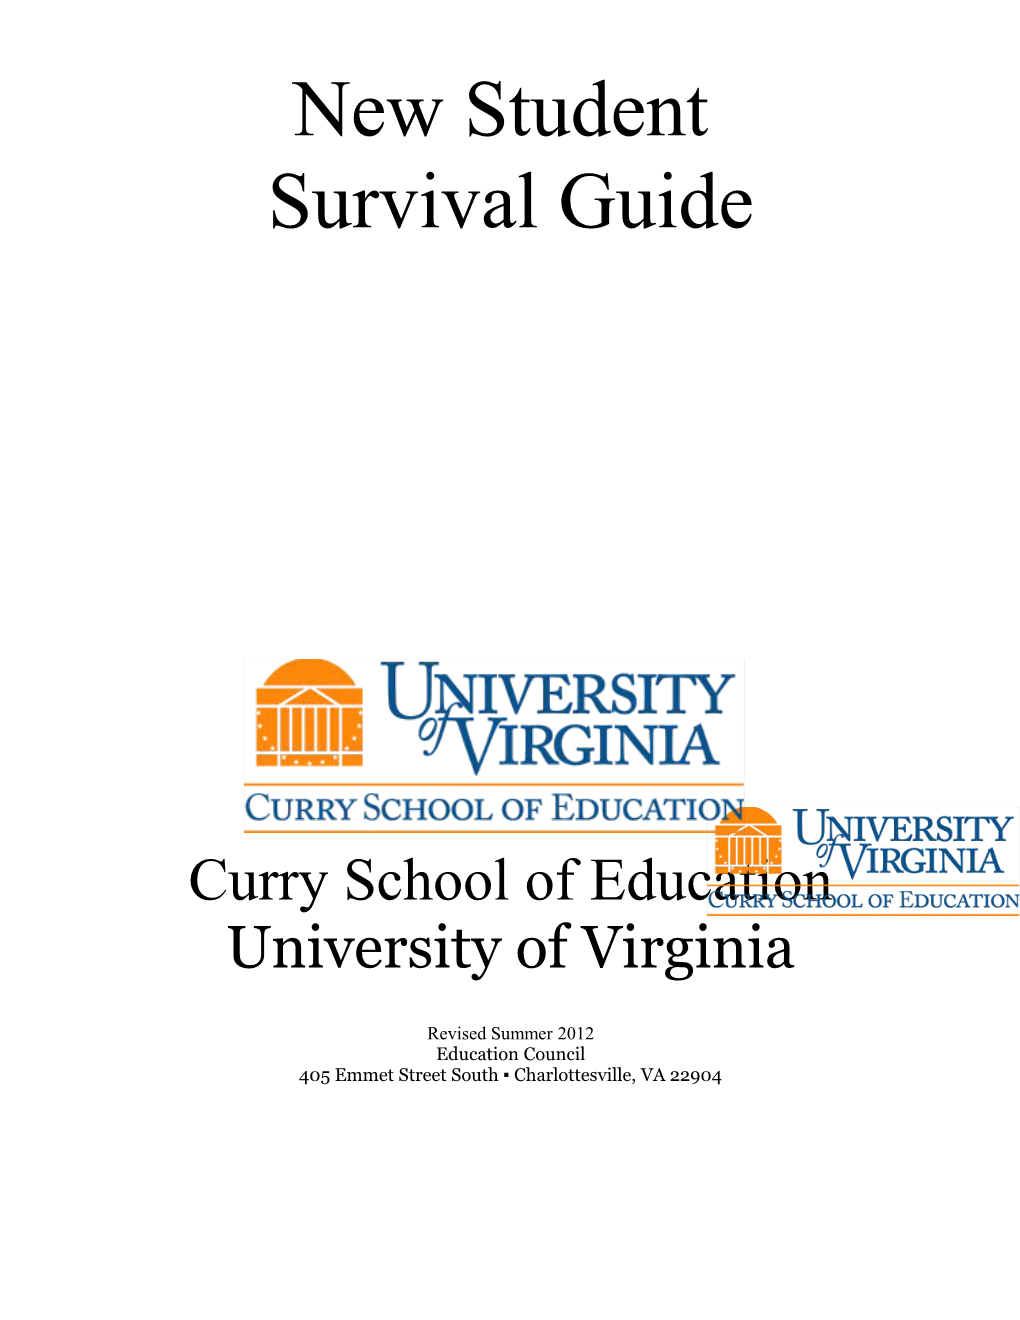 New Student Survival Guide